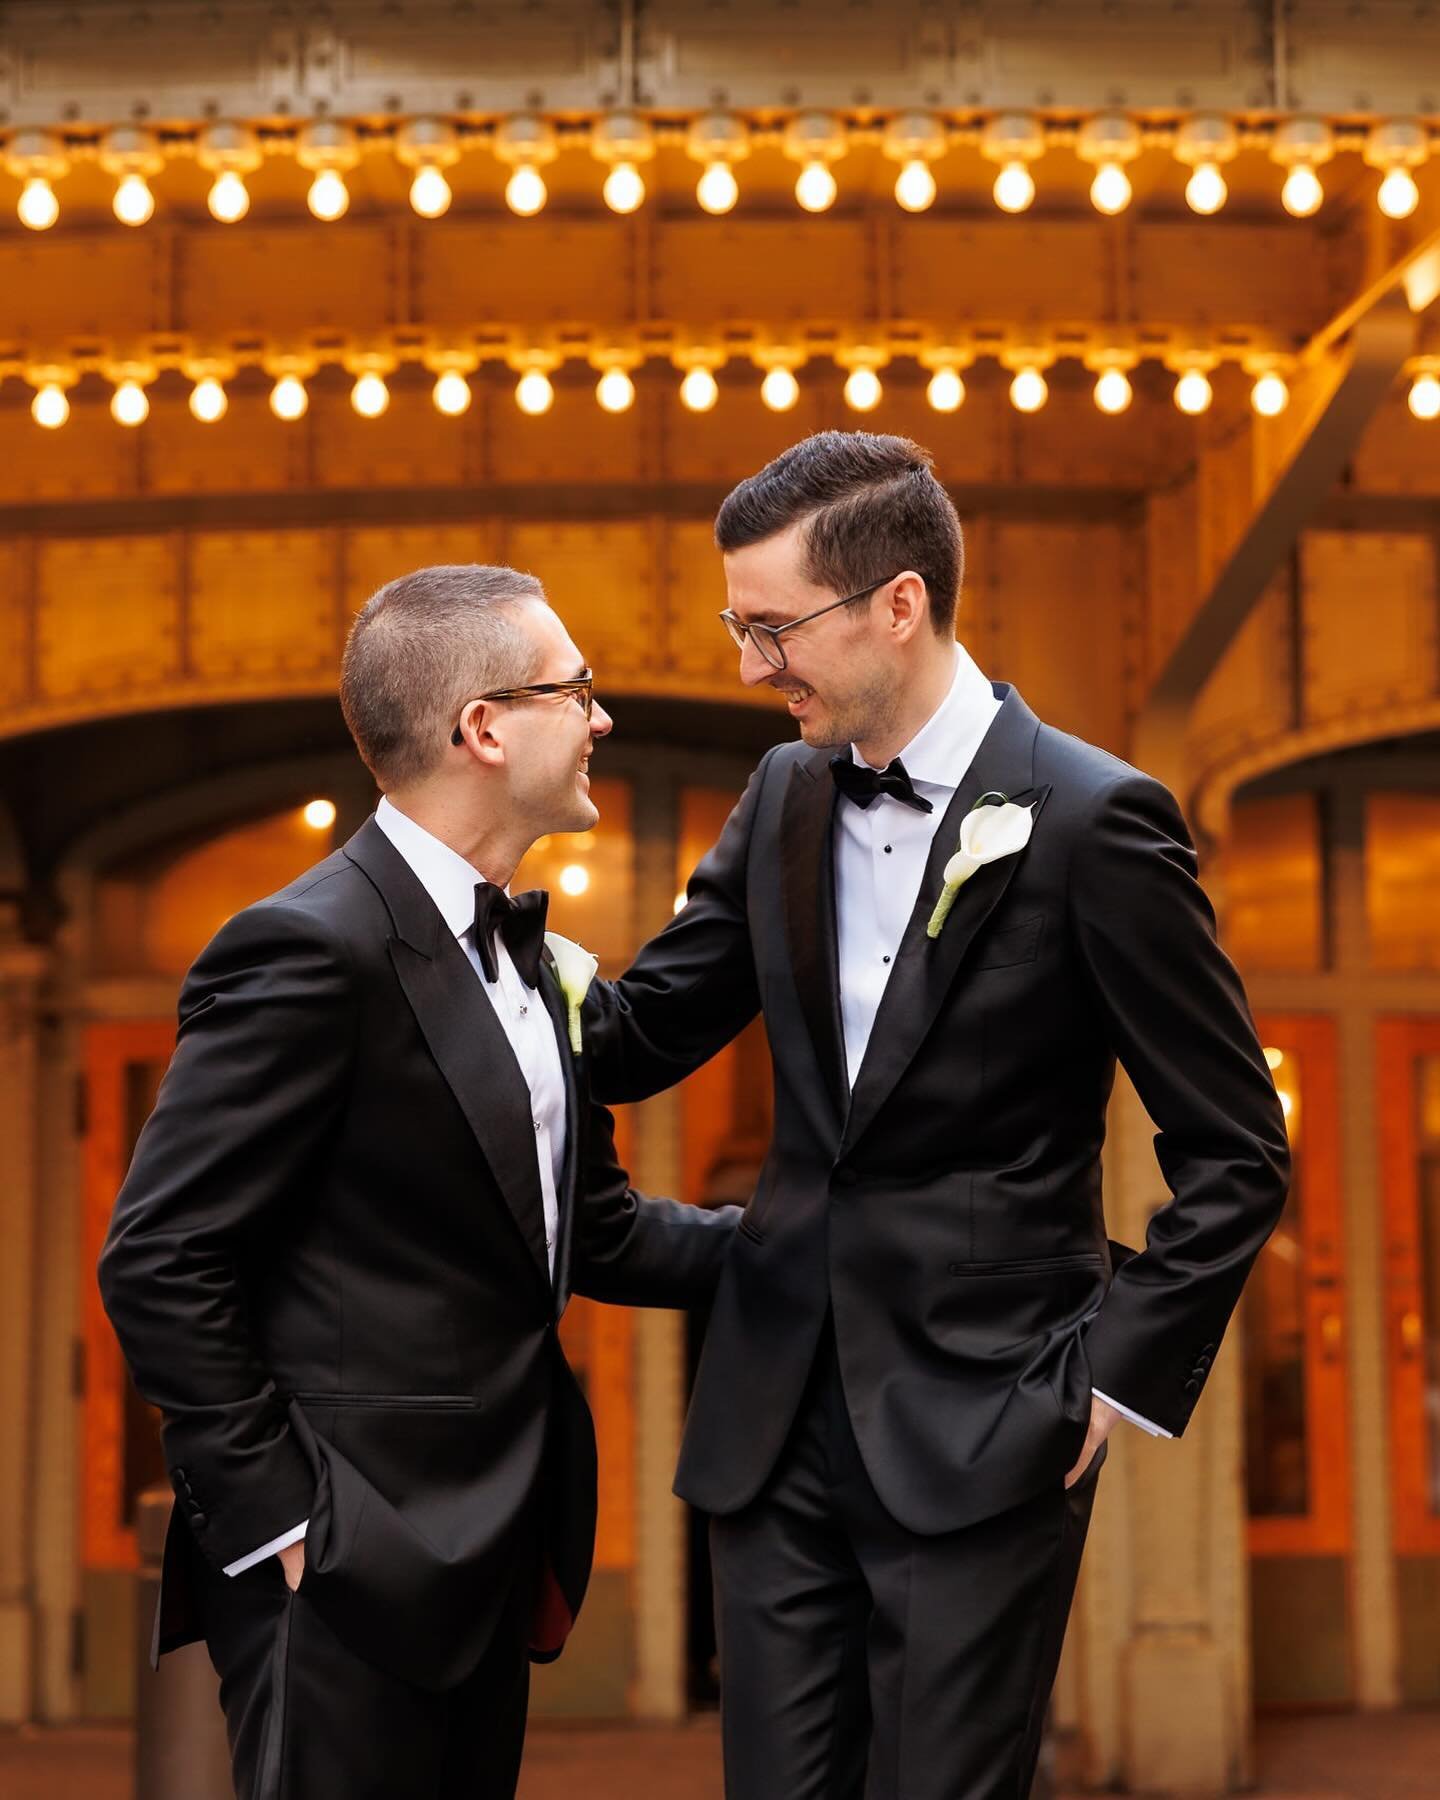 Matt and Scott found a way to combine a black tie wedding with a totally chill, cheeky, fun vibe. These two are the sweetest and it brought me so much joy to share in all of the moments with them&mdash;from the prep room where they got ready with all